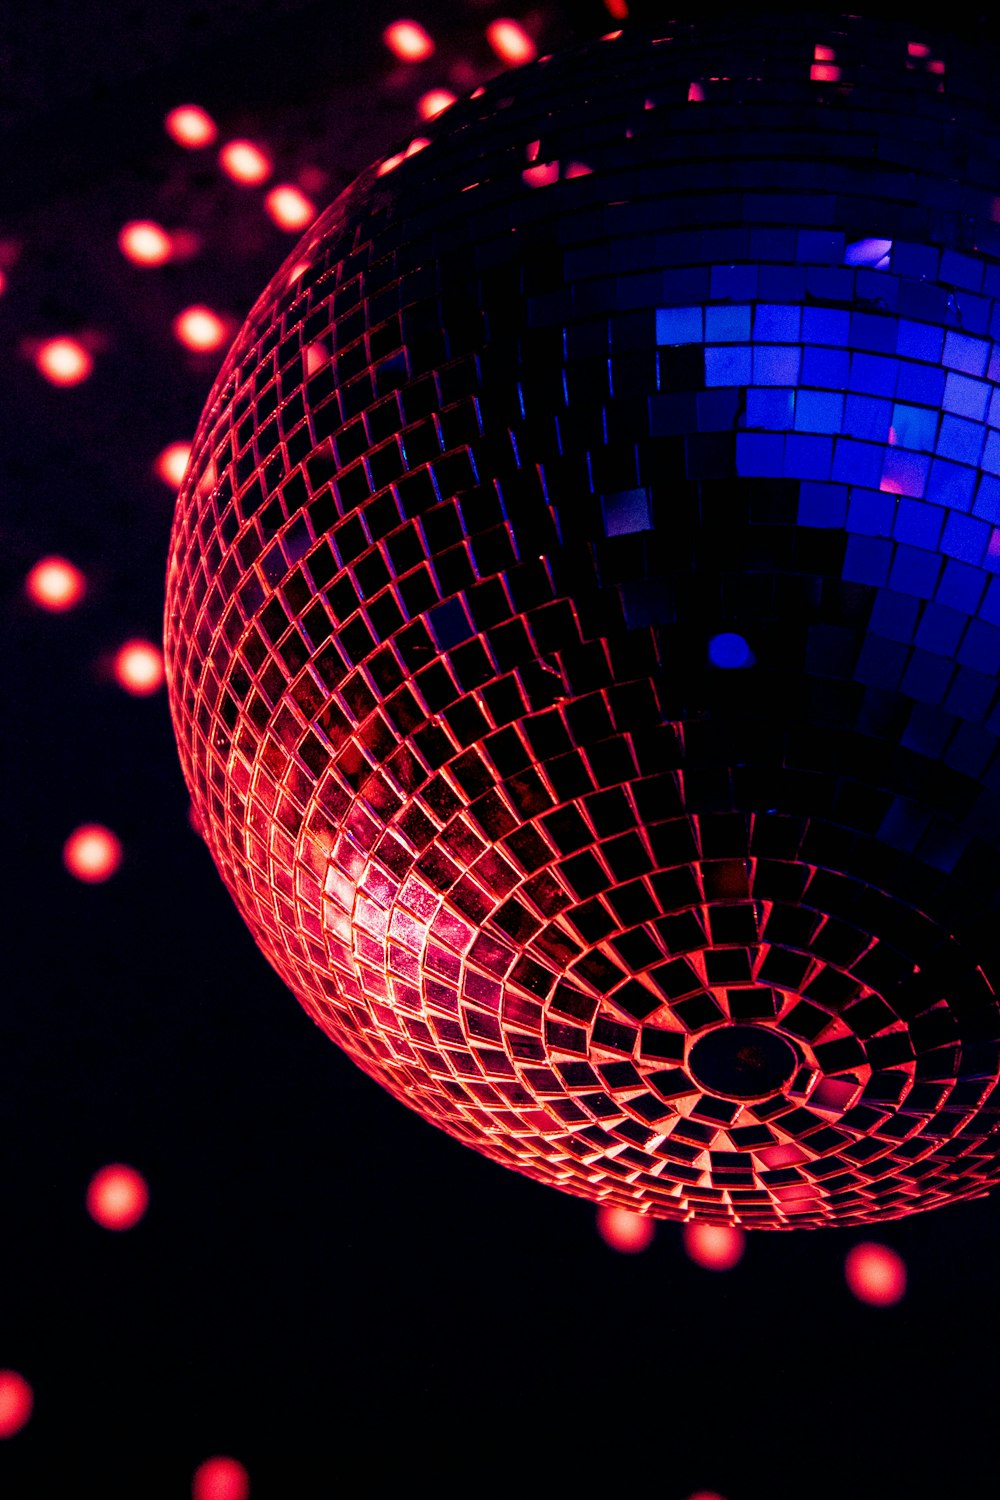 500+ Disco Ball Pictures [HD] | Download Free Images on Unsplash